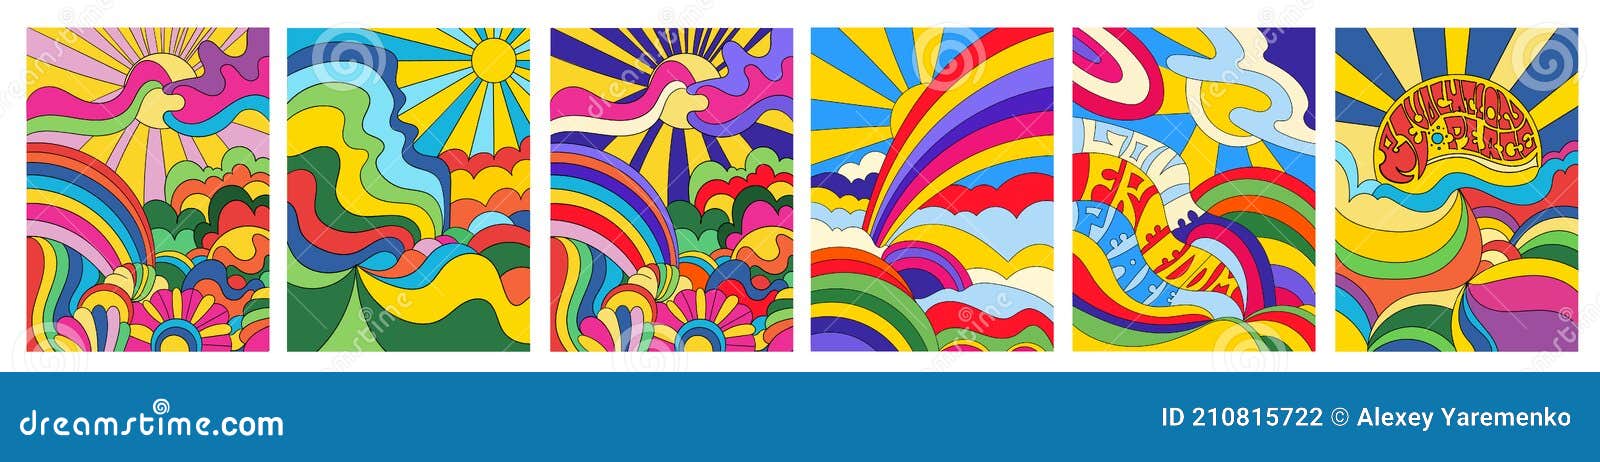 set of 6 brightly colored psychedelic landscapes